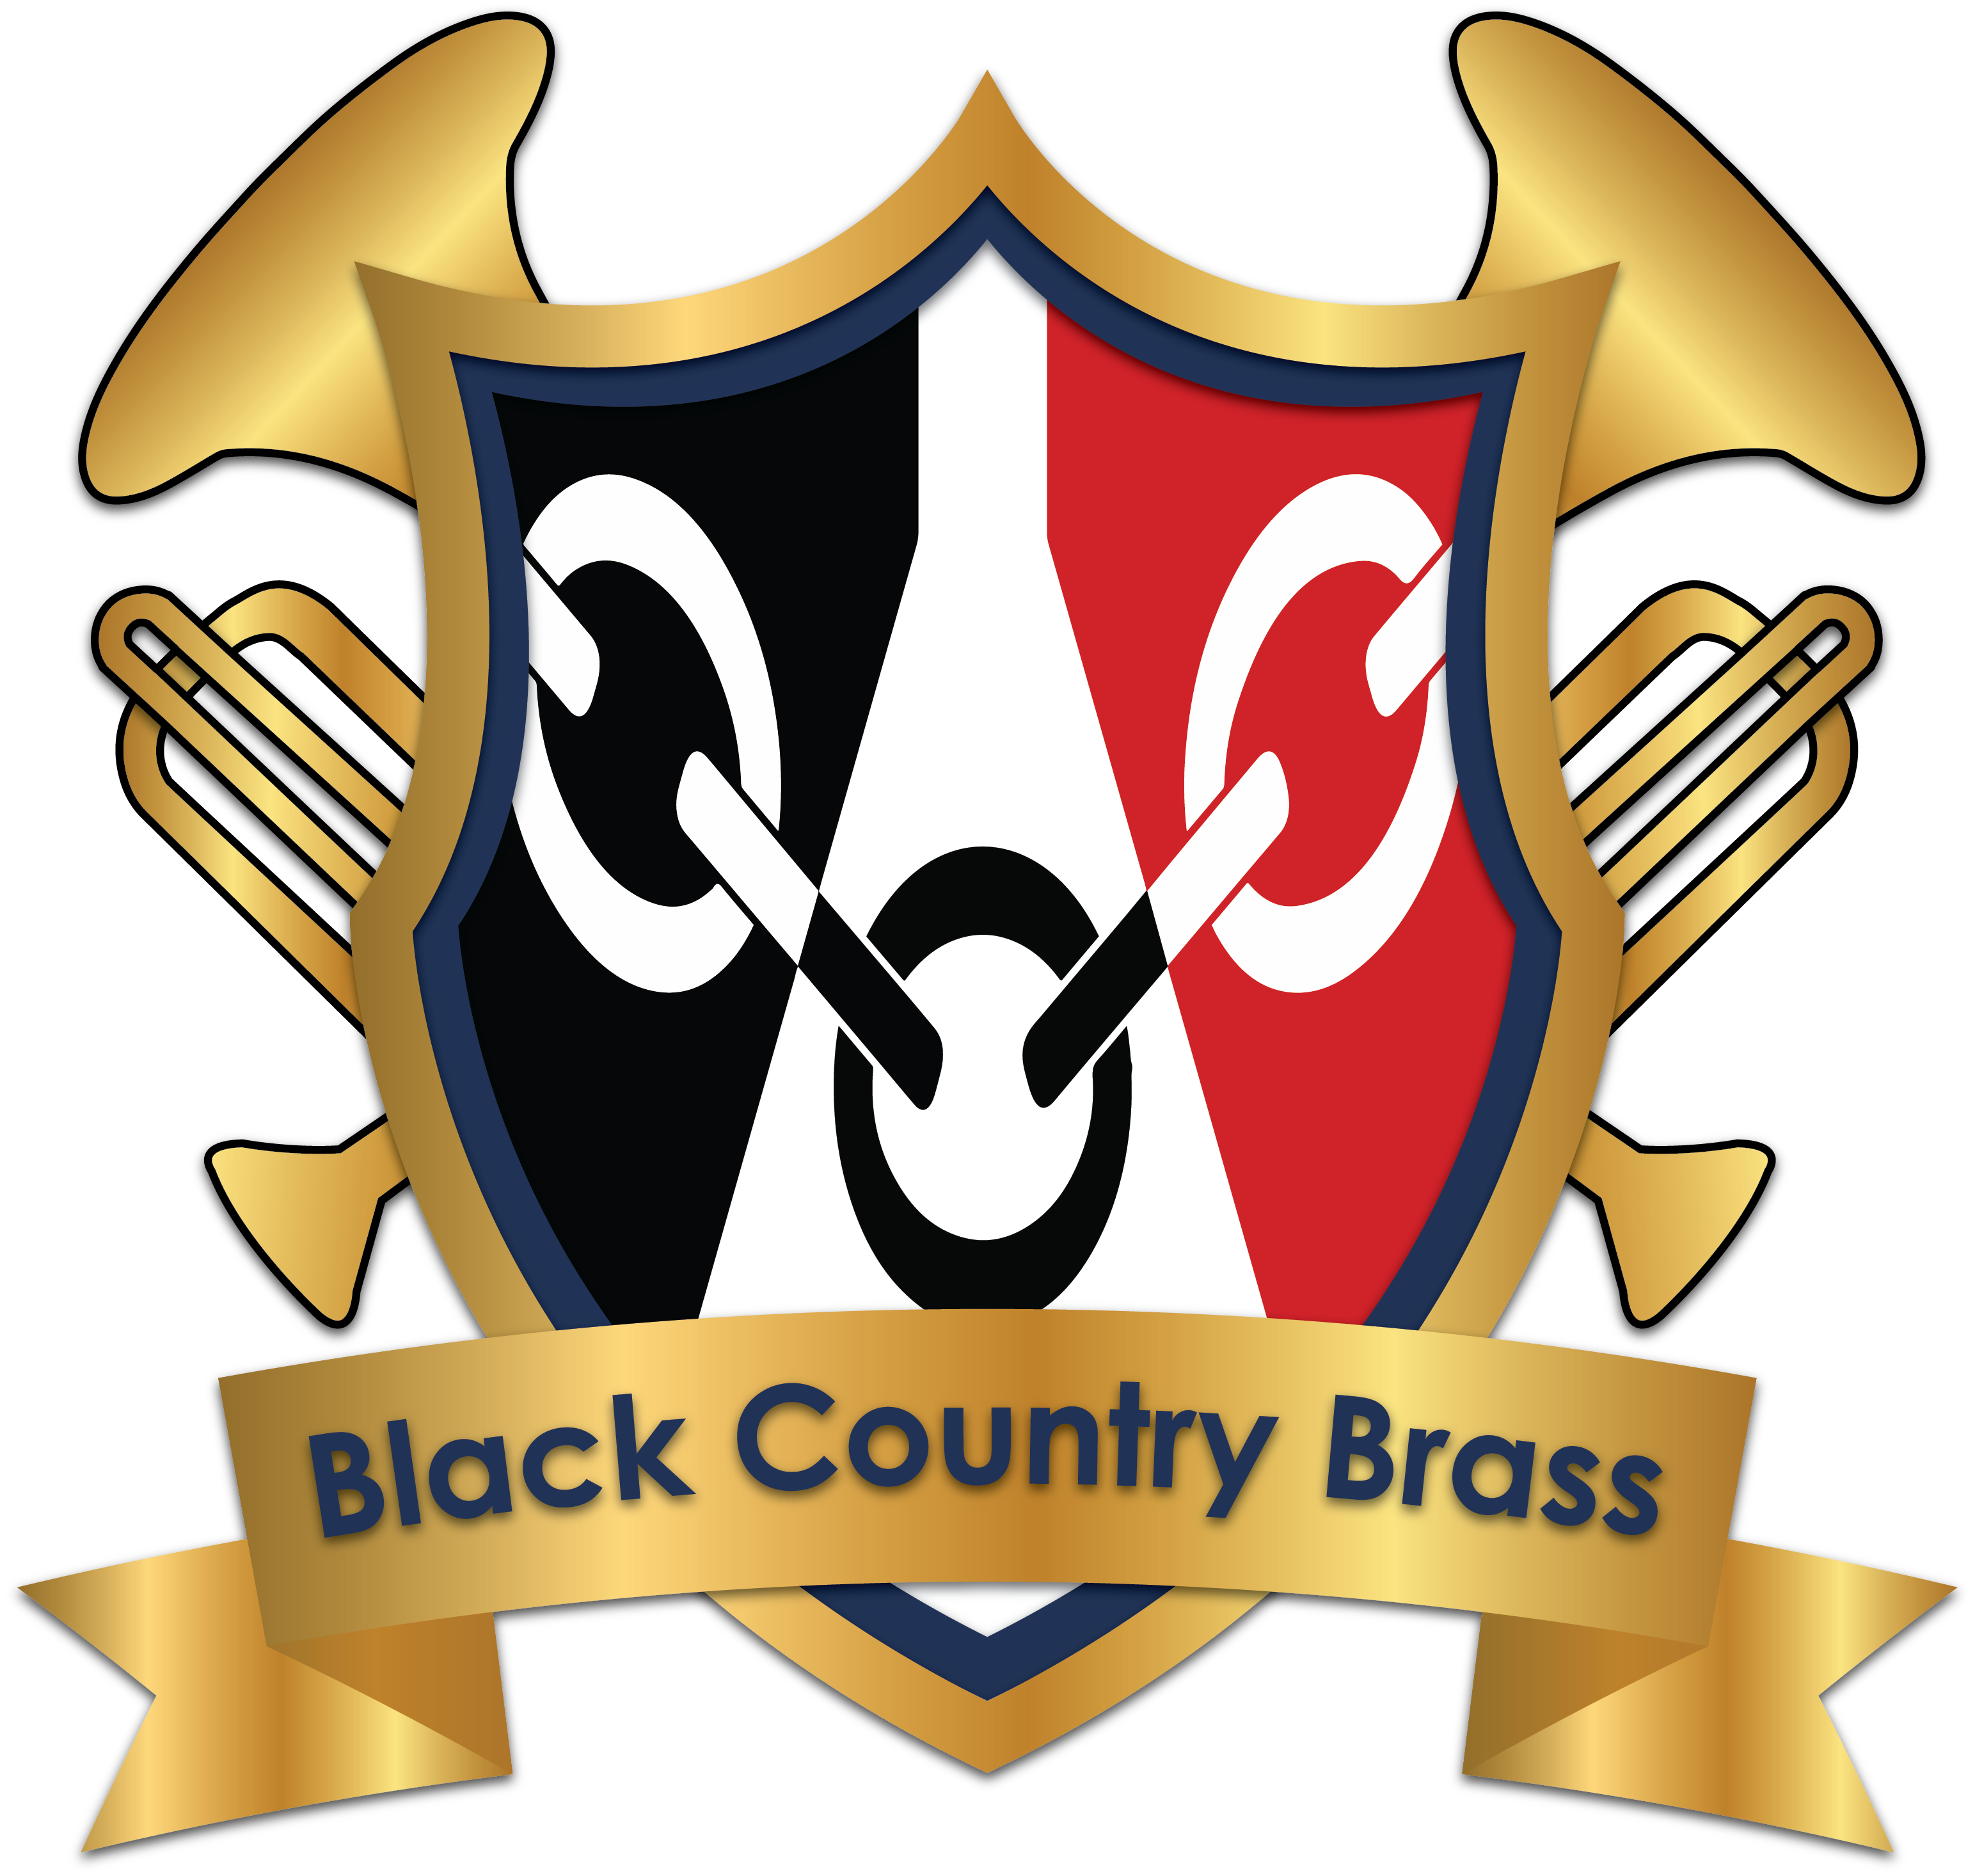 Black Country Brass Band